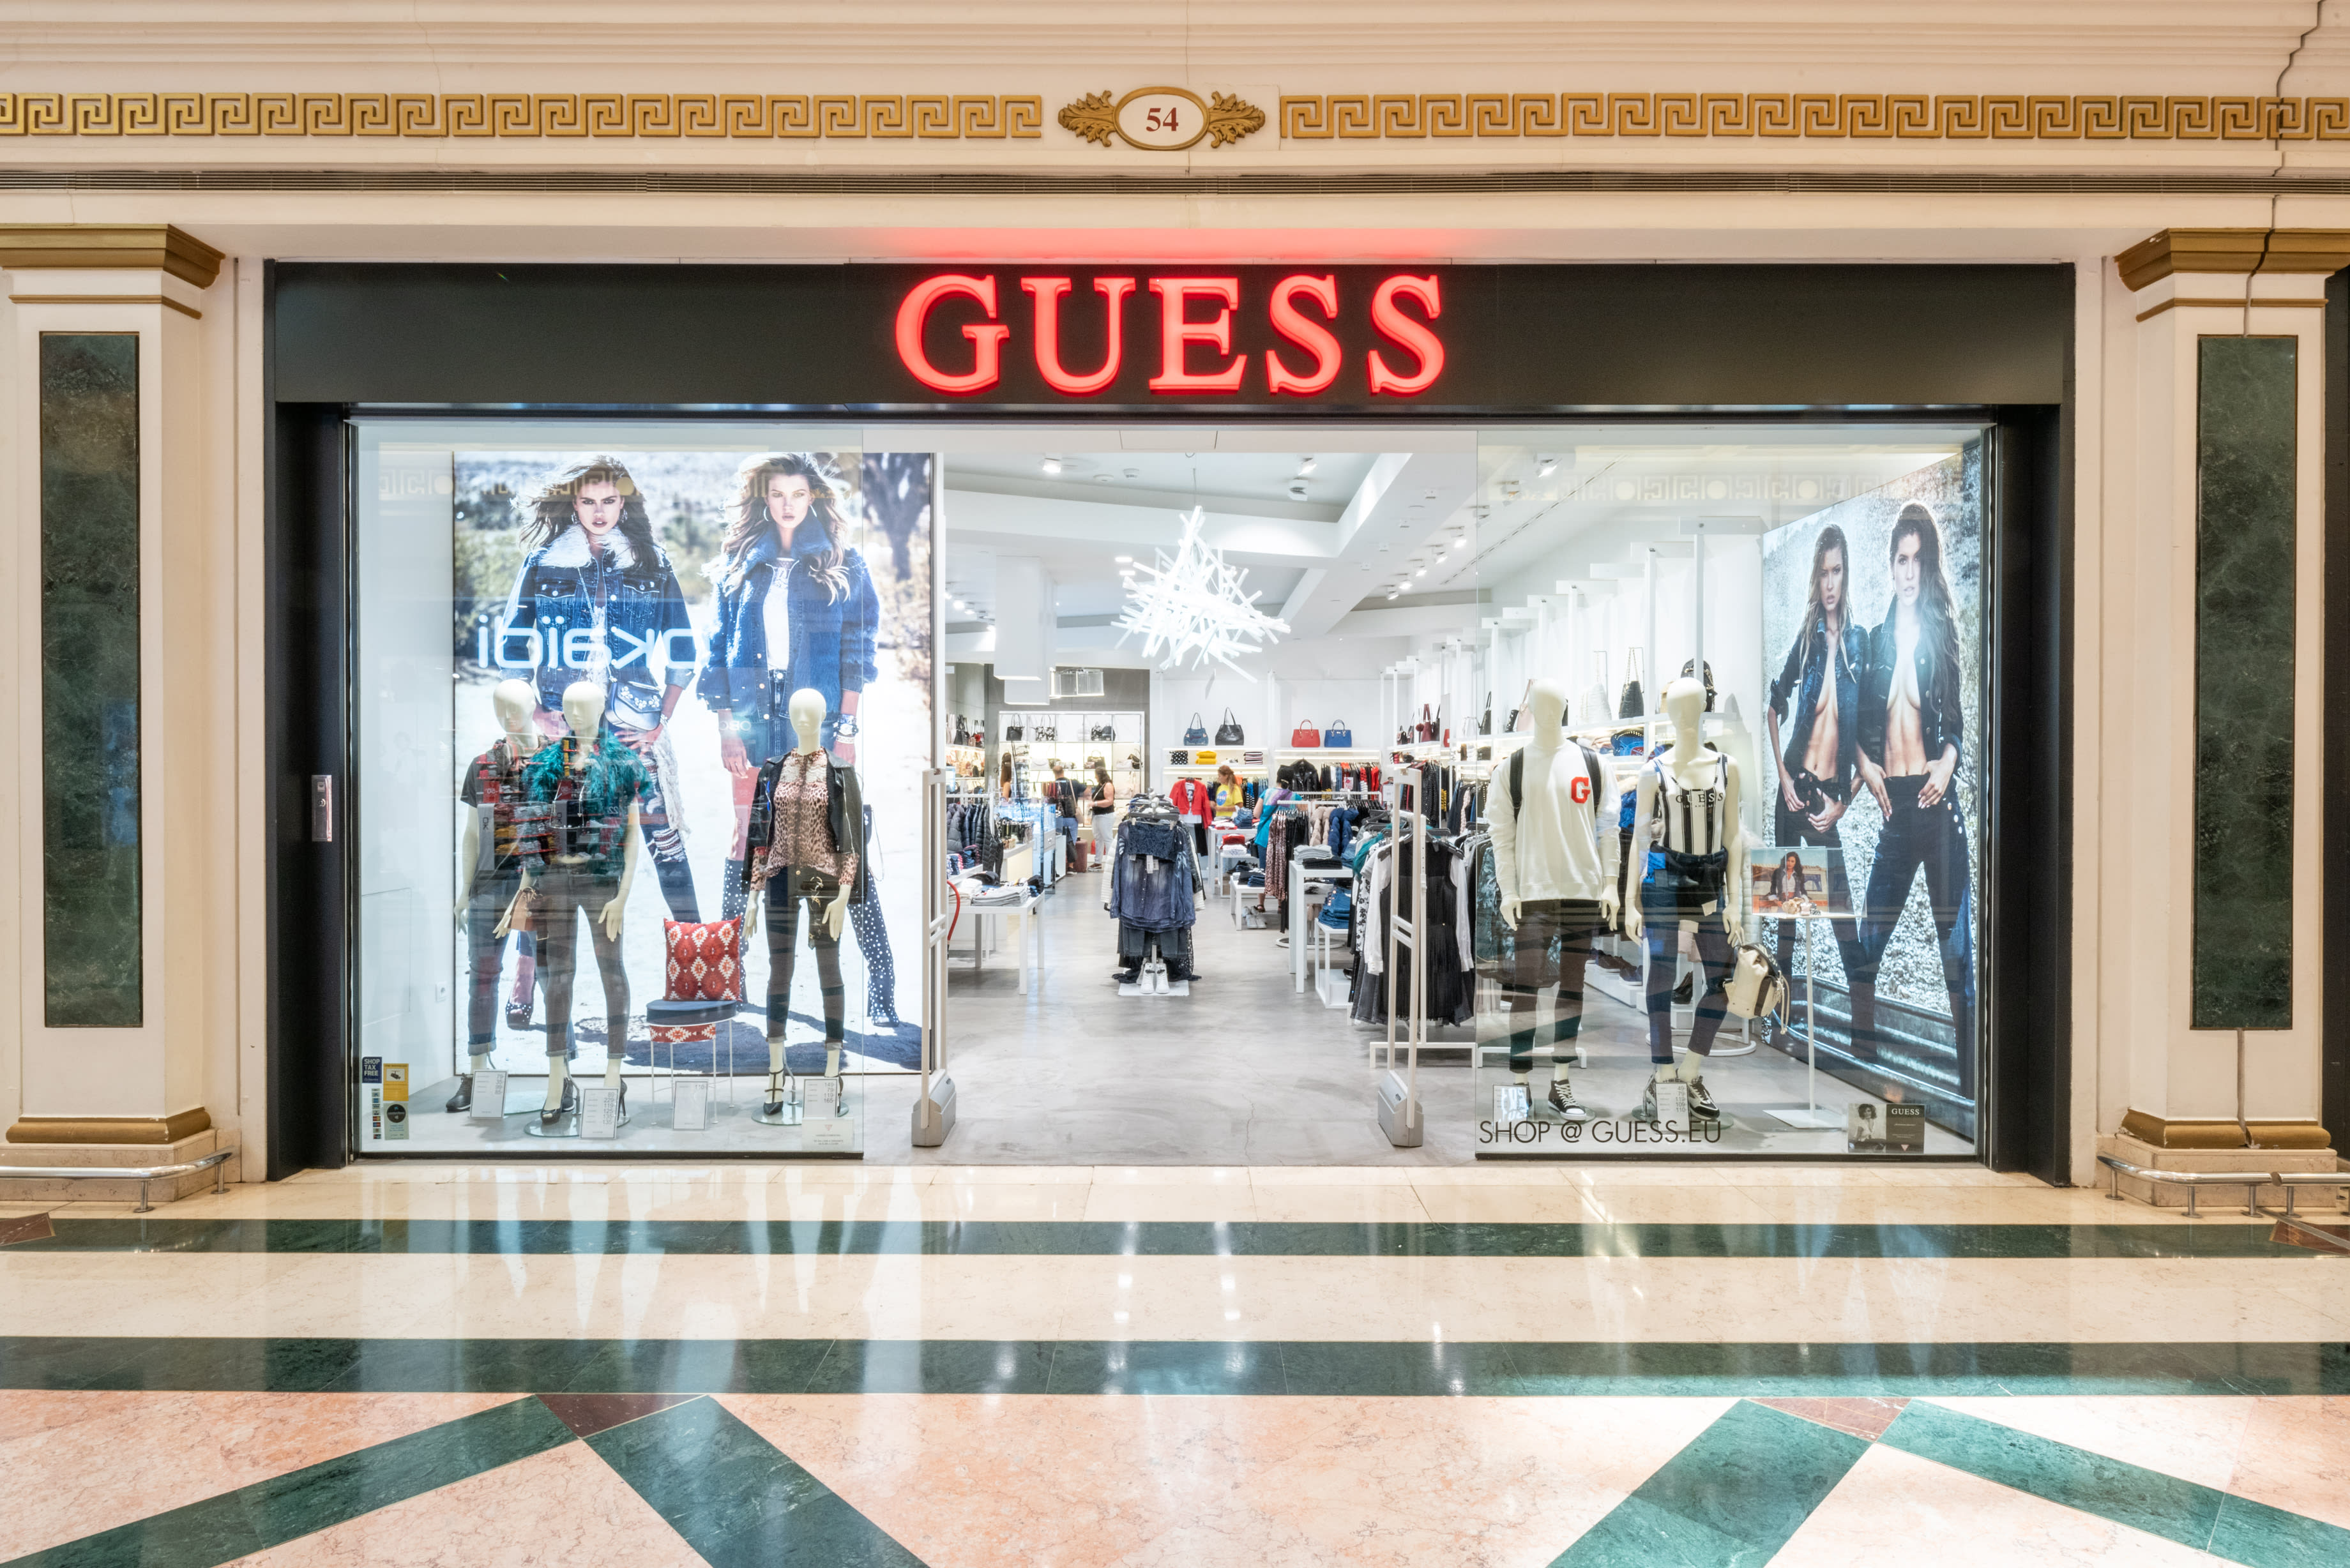 Guess clothing store on Queen St. W. in Toronto, Ontario, Canada